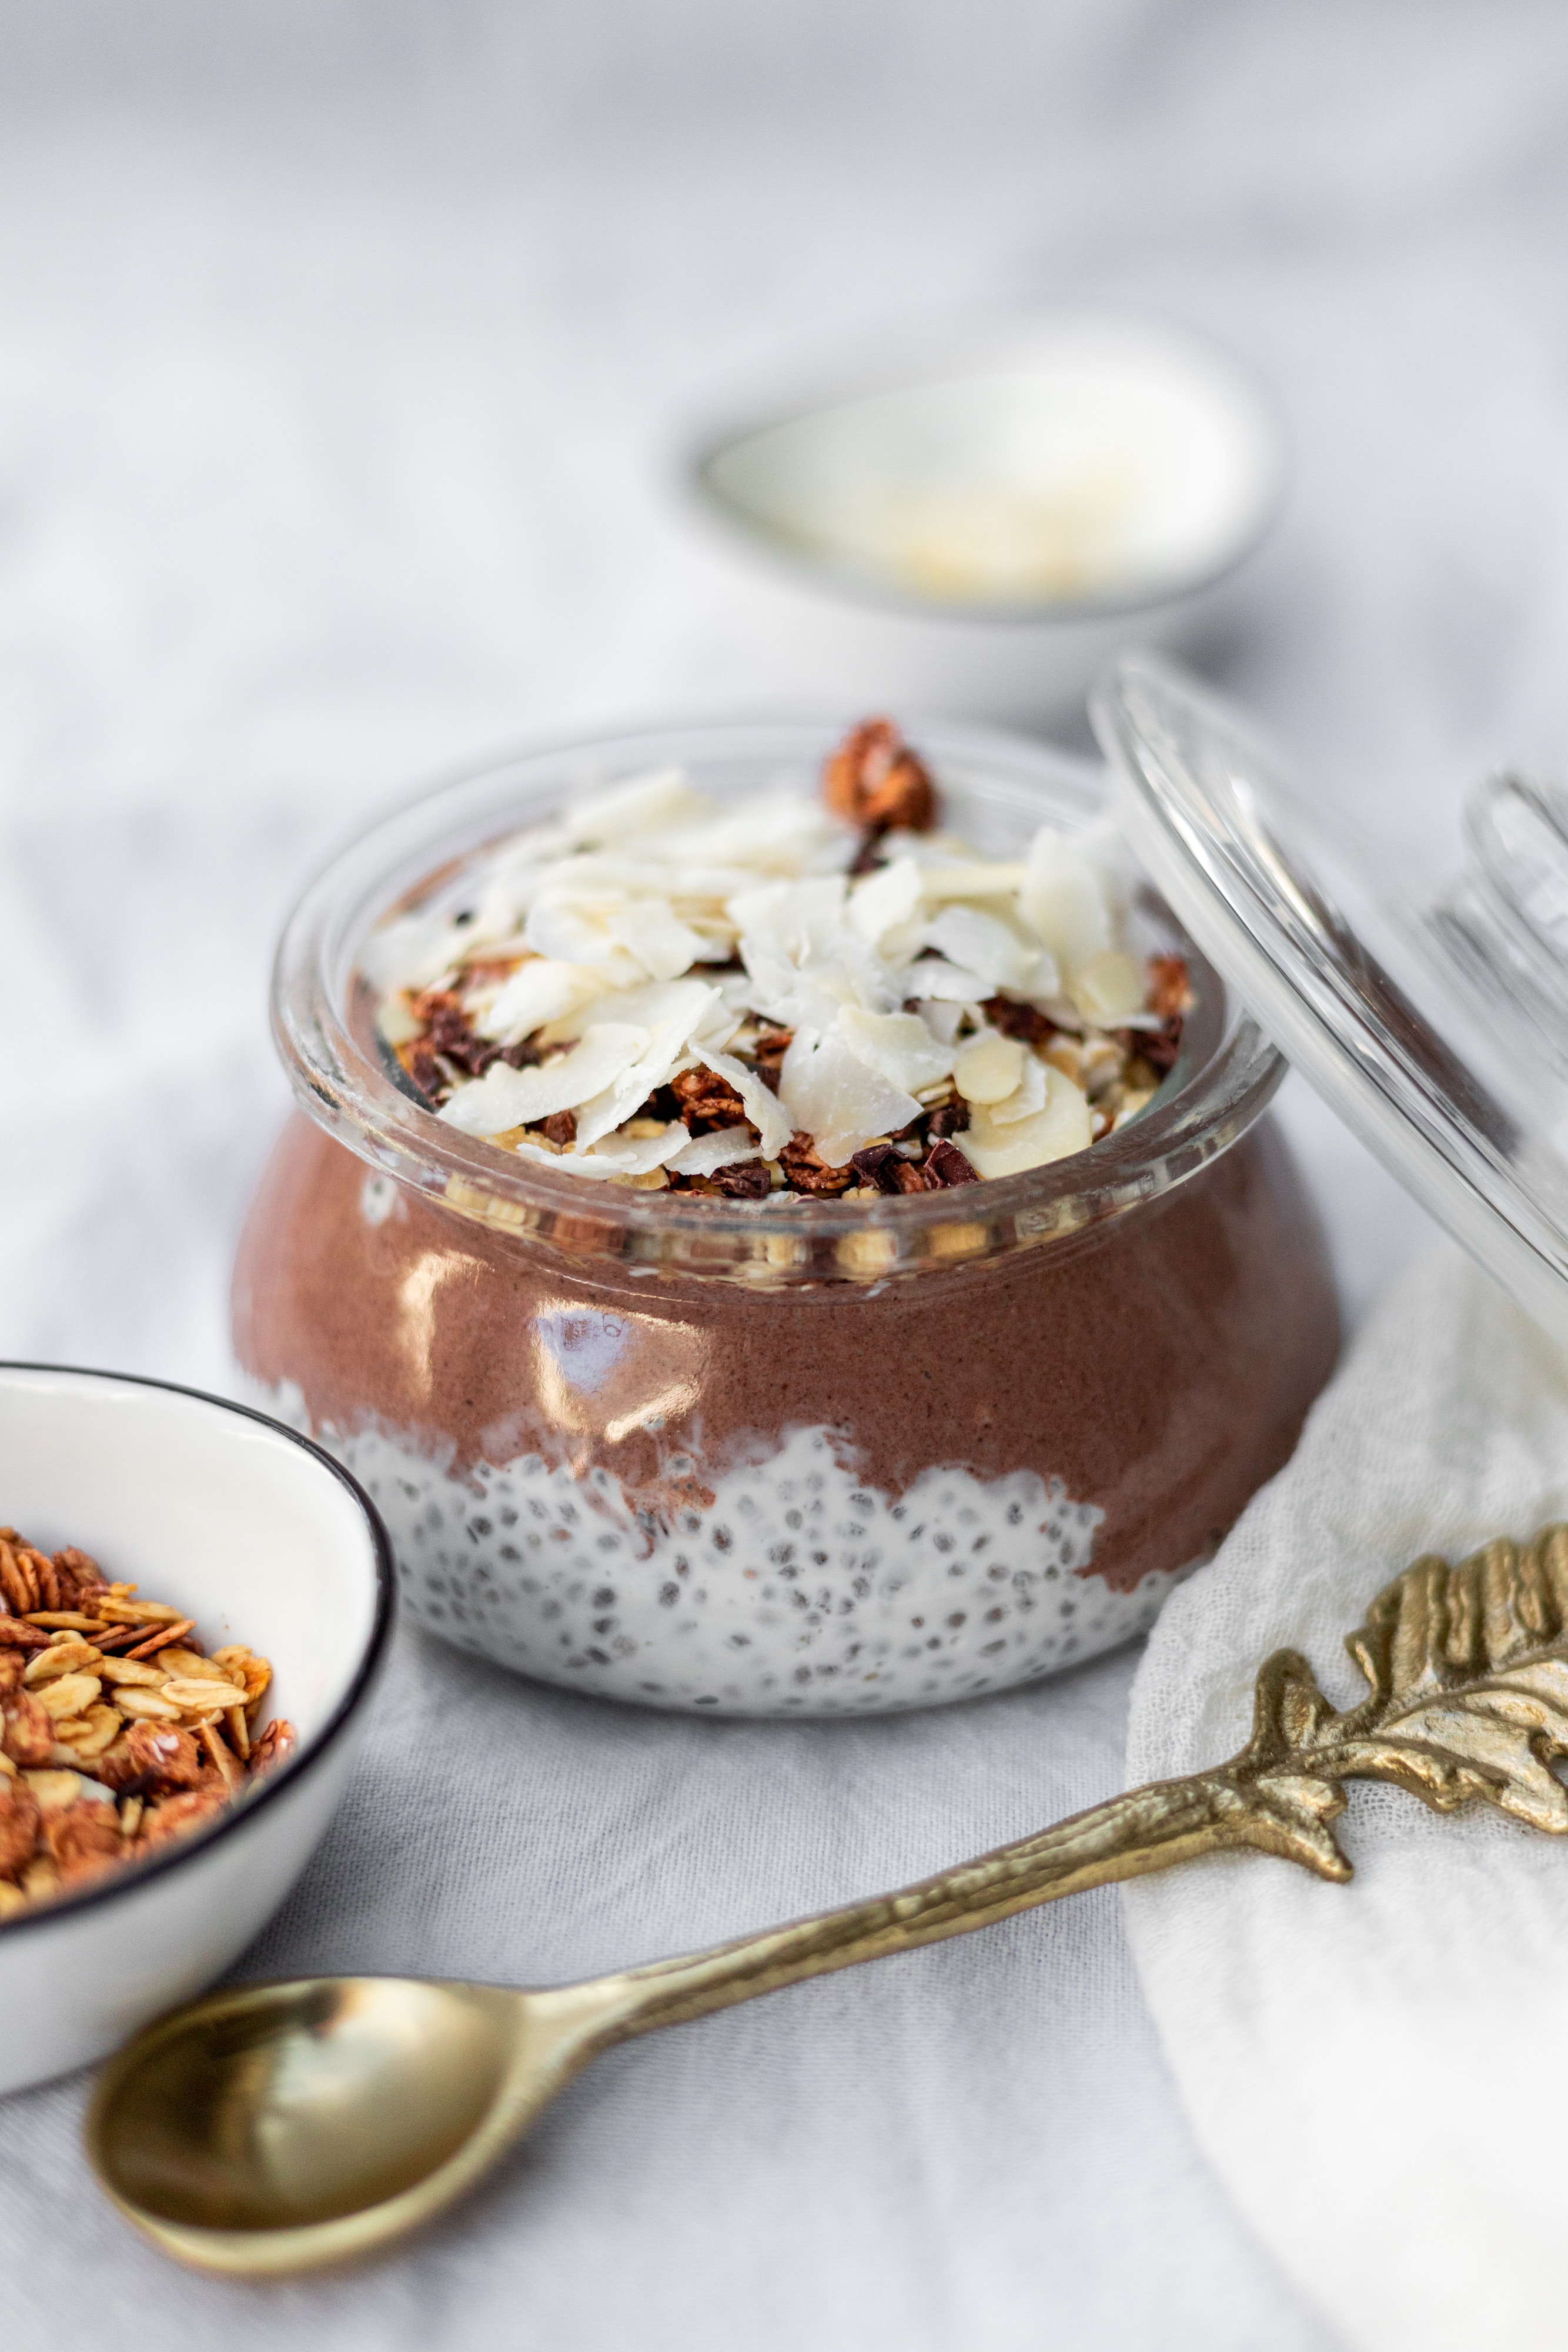 Guilt-free desserts: 3 healthy and delicious chia seed recipes to ...